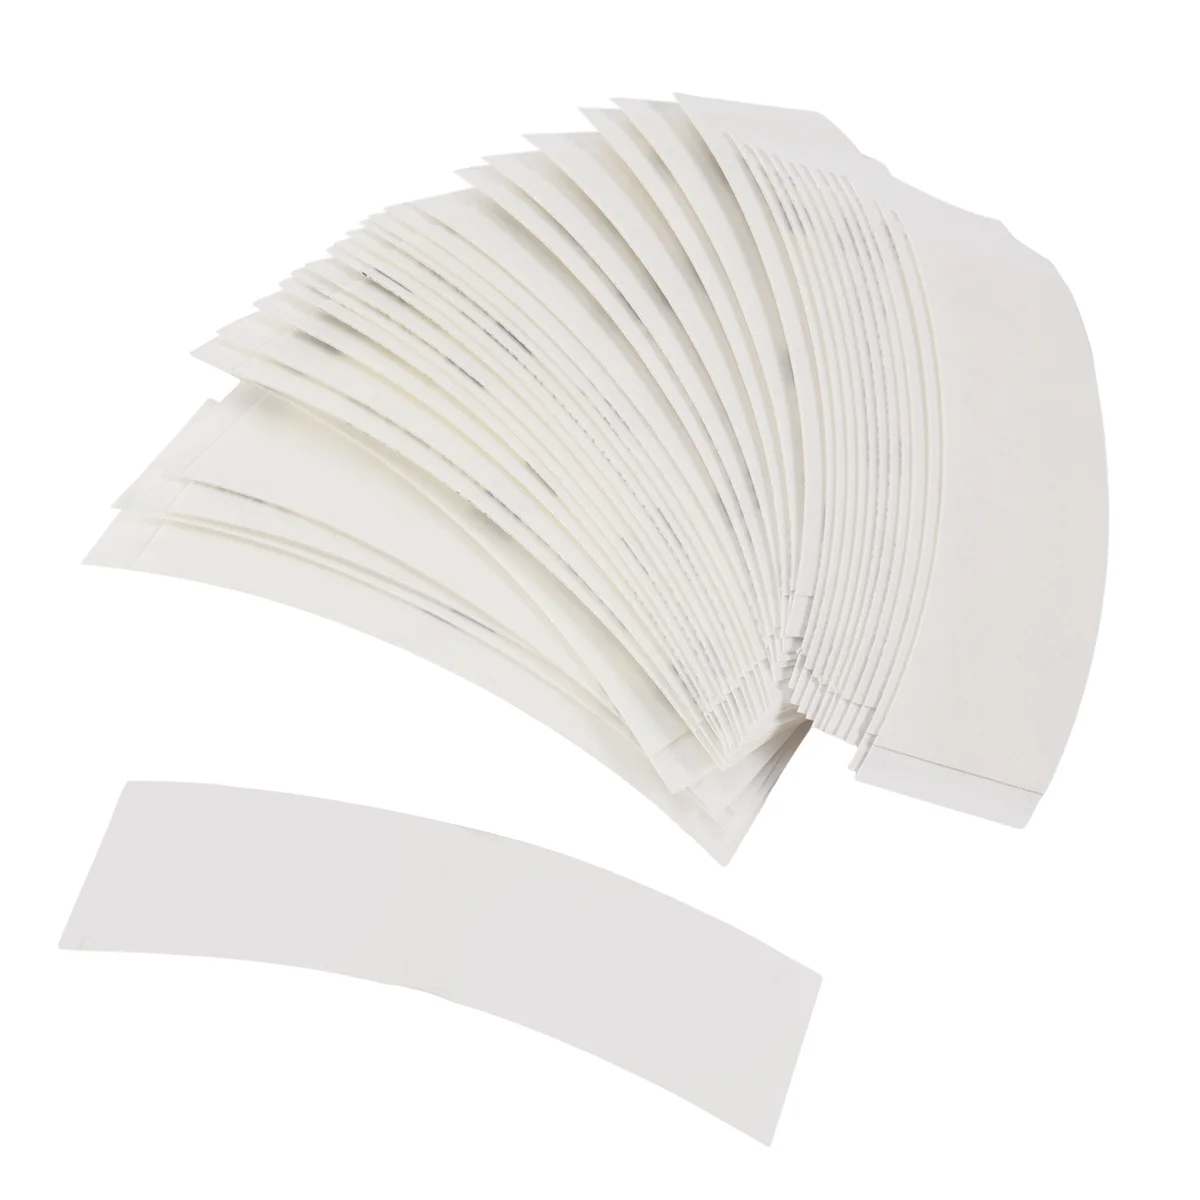 

36Pcs/Lot Ultra Hold Wig Double Sided Tape Strong Adhesive Hair System Extension Strips Waterproof for Toupees/Lace Wig